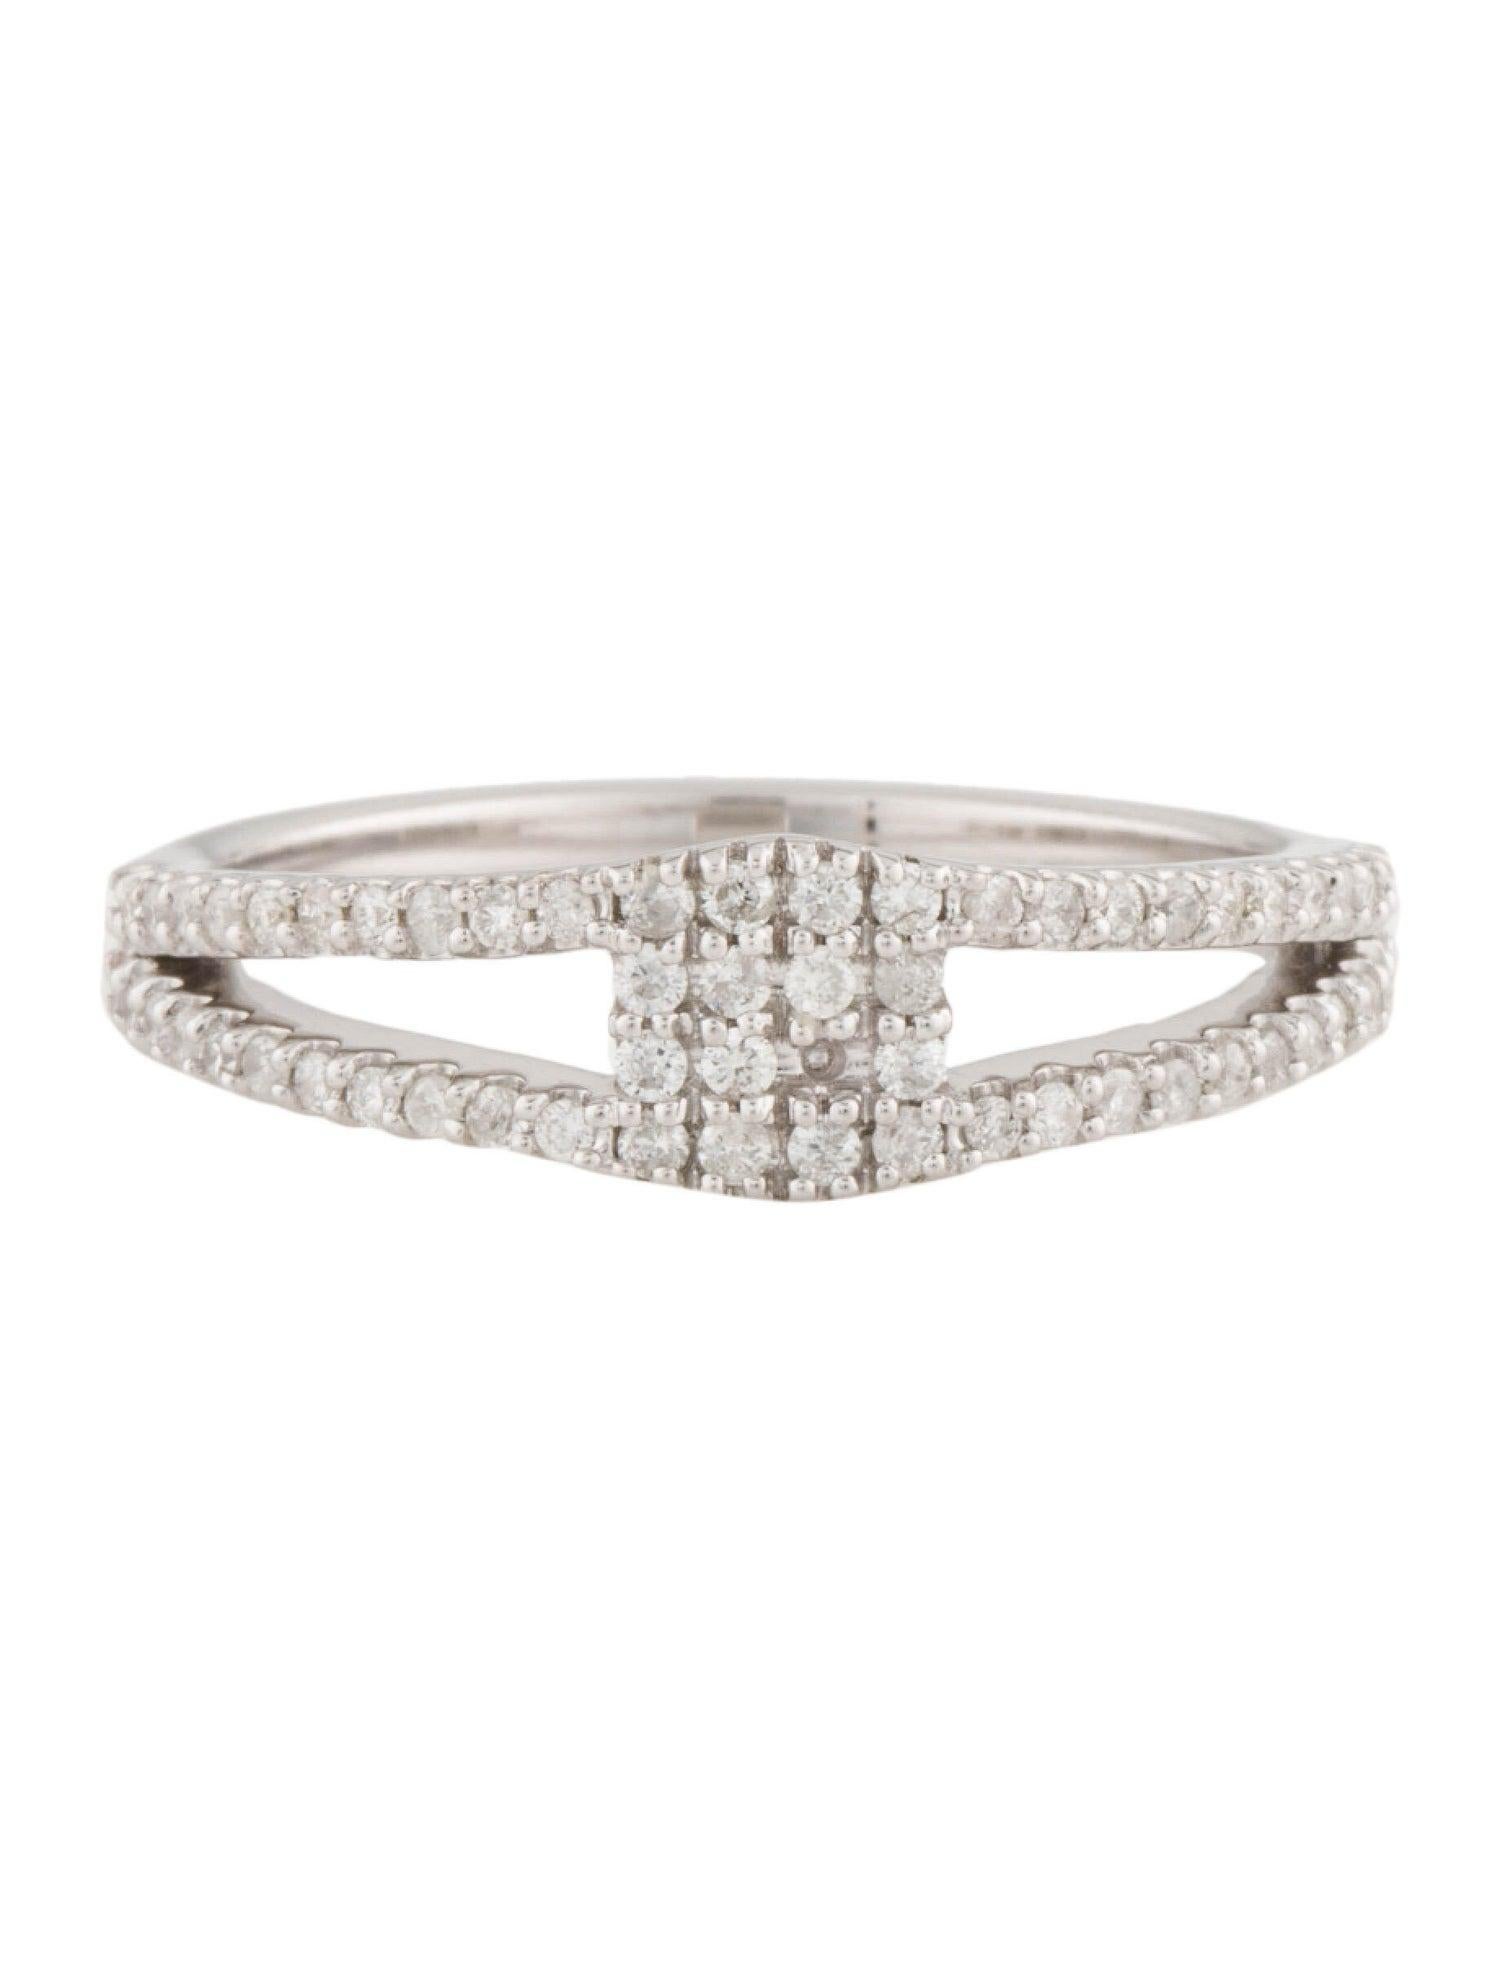 Round Cut 14K White Gold Diamond Band - 0.33ct Round Brilliant Cut, Near Colorless For Sale